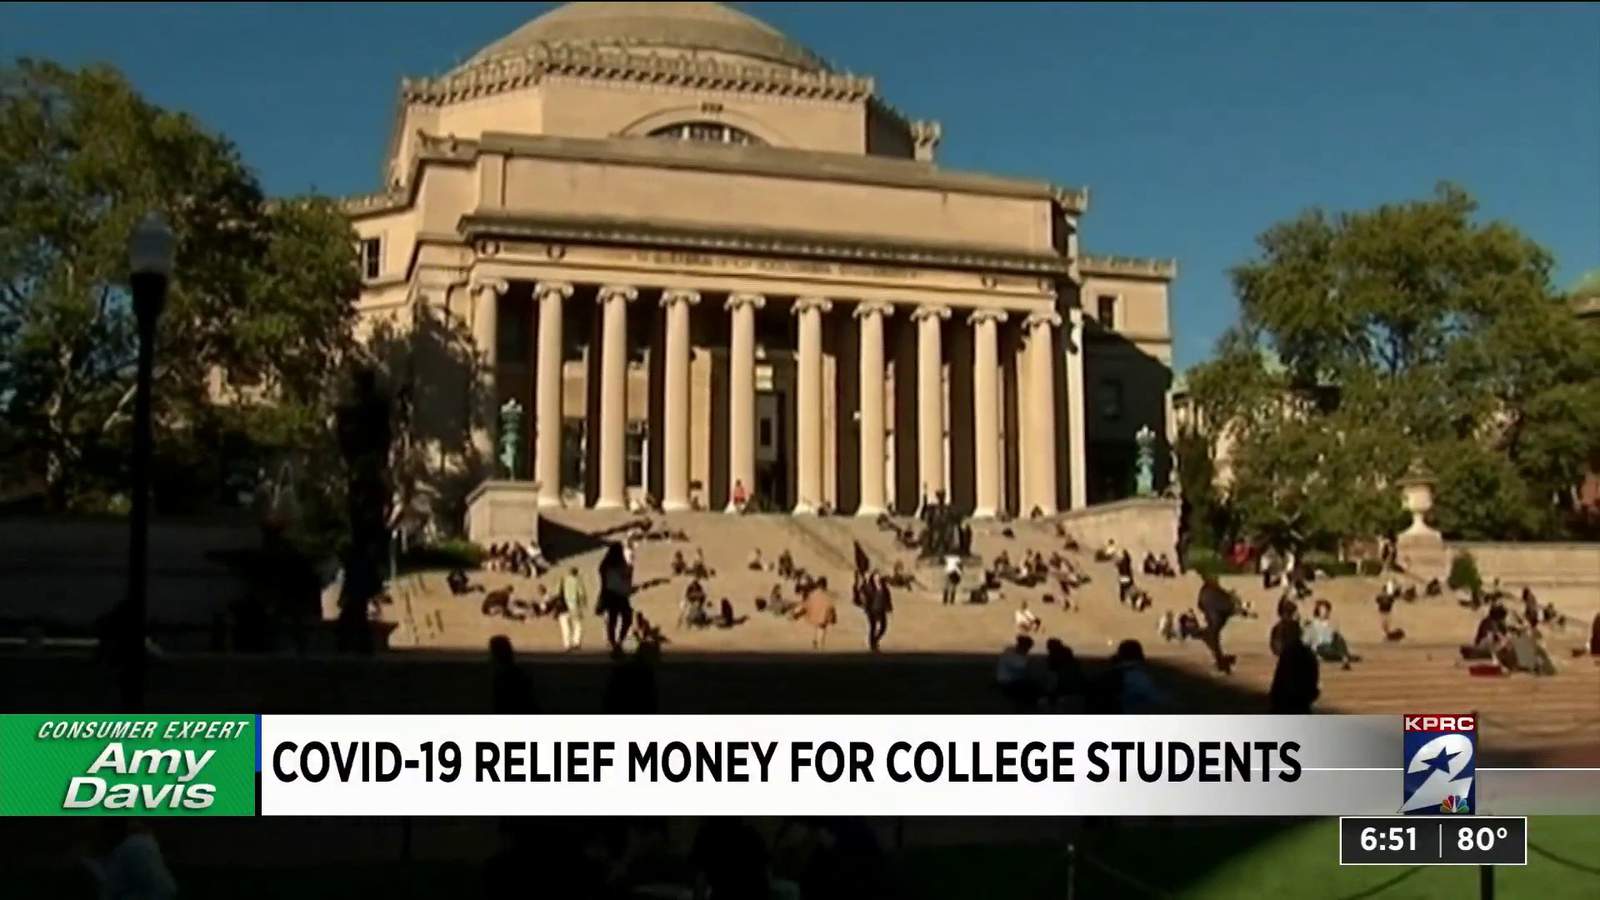 This is what you need to know about the COVID-19 emergency relief grants for college students